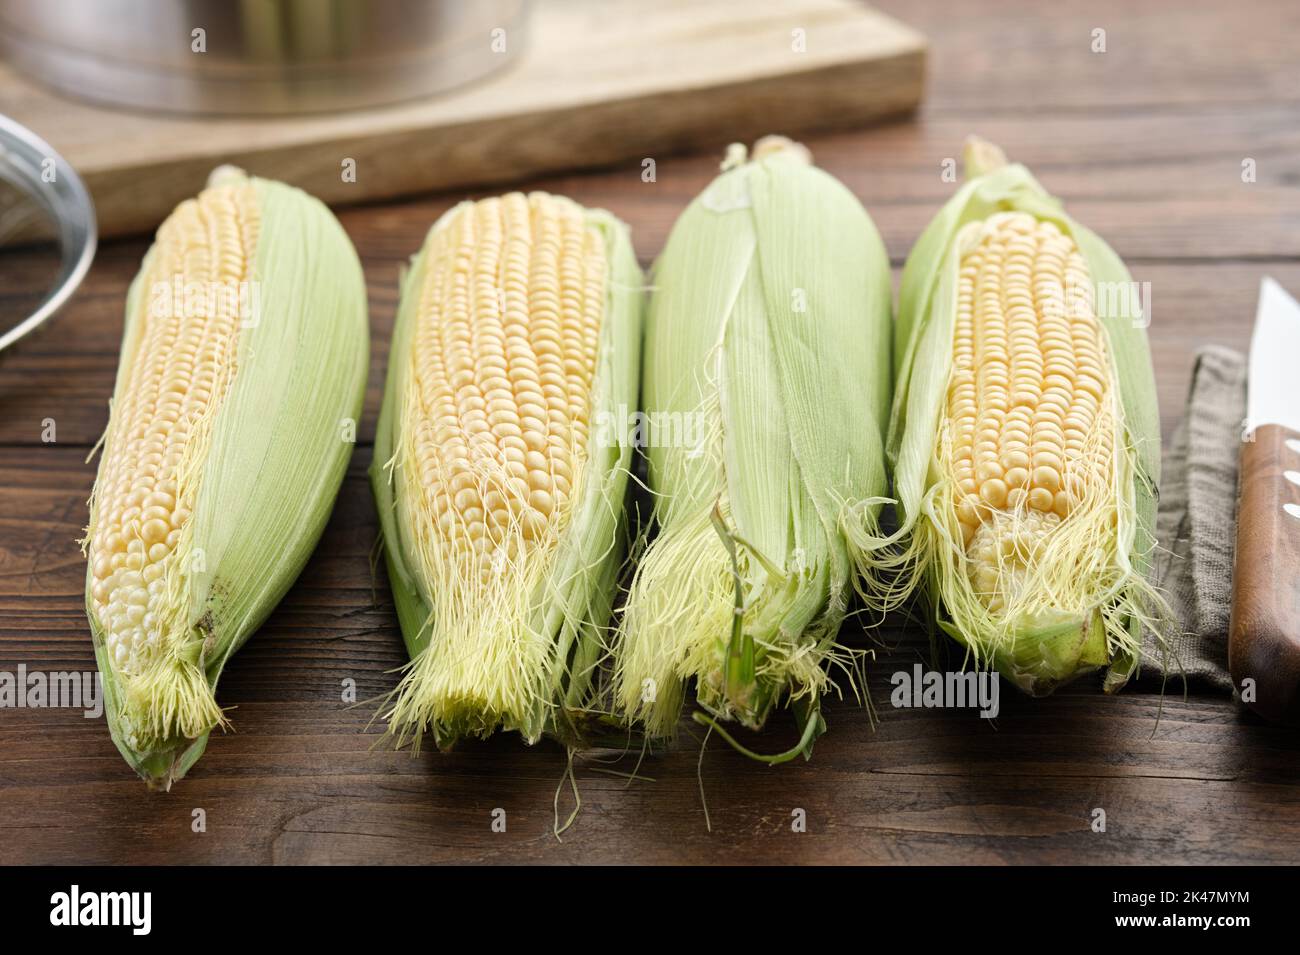 Raw sweet corn cobs for cooking and kitchen knife on kitchen table, cooking pot on background. Stock Photo